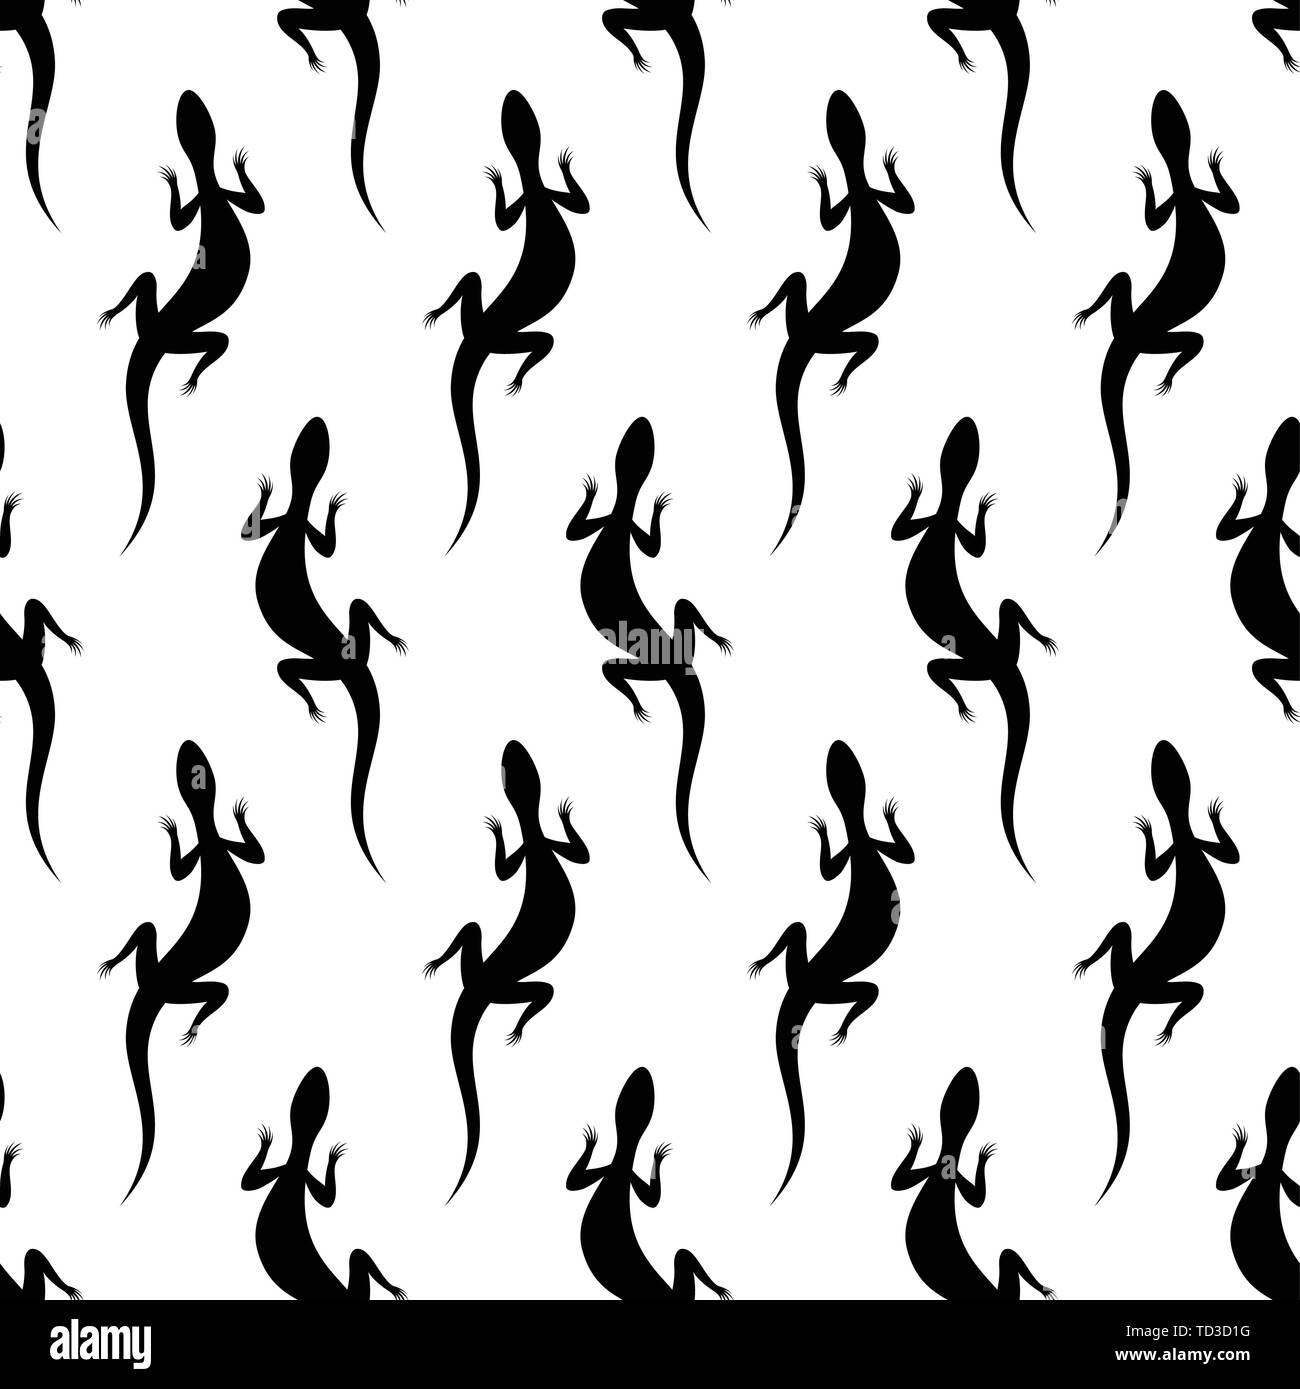 Seamless pattern with silhouettes of lizards. Australian animal. Isolated on white background. Black silhouettes. Hand drawn. Vector illustration. Stock Vector